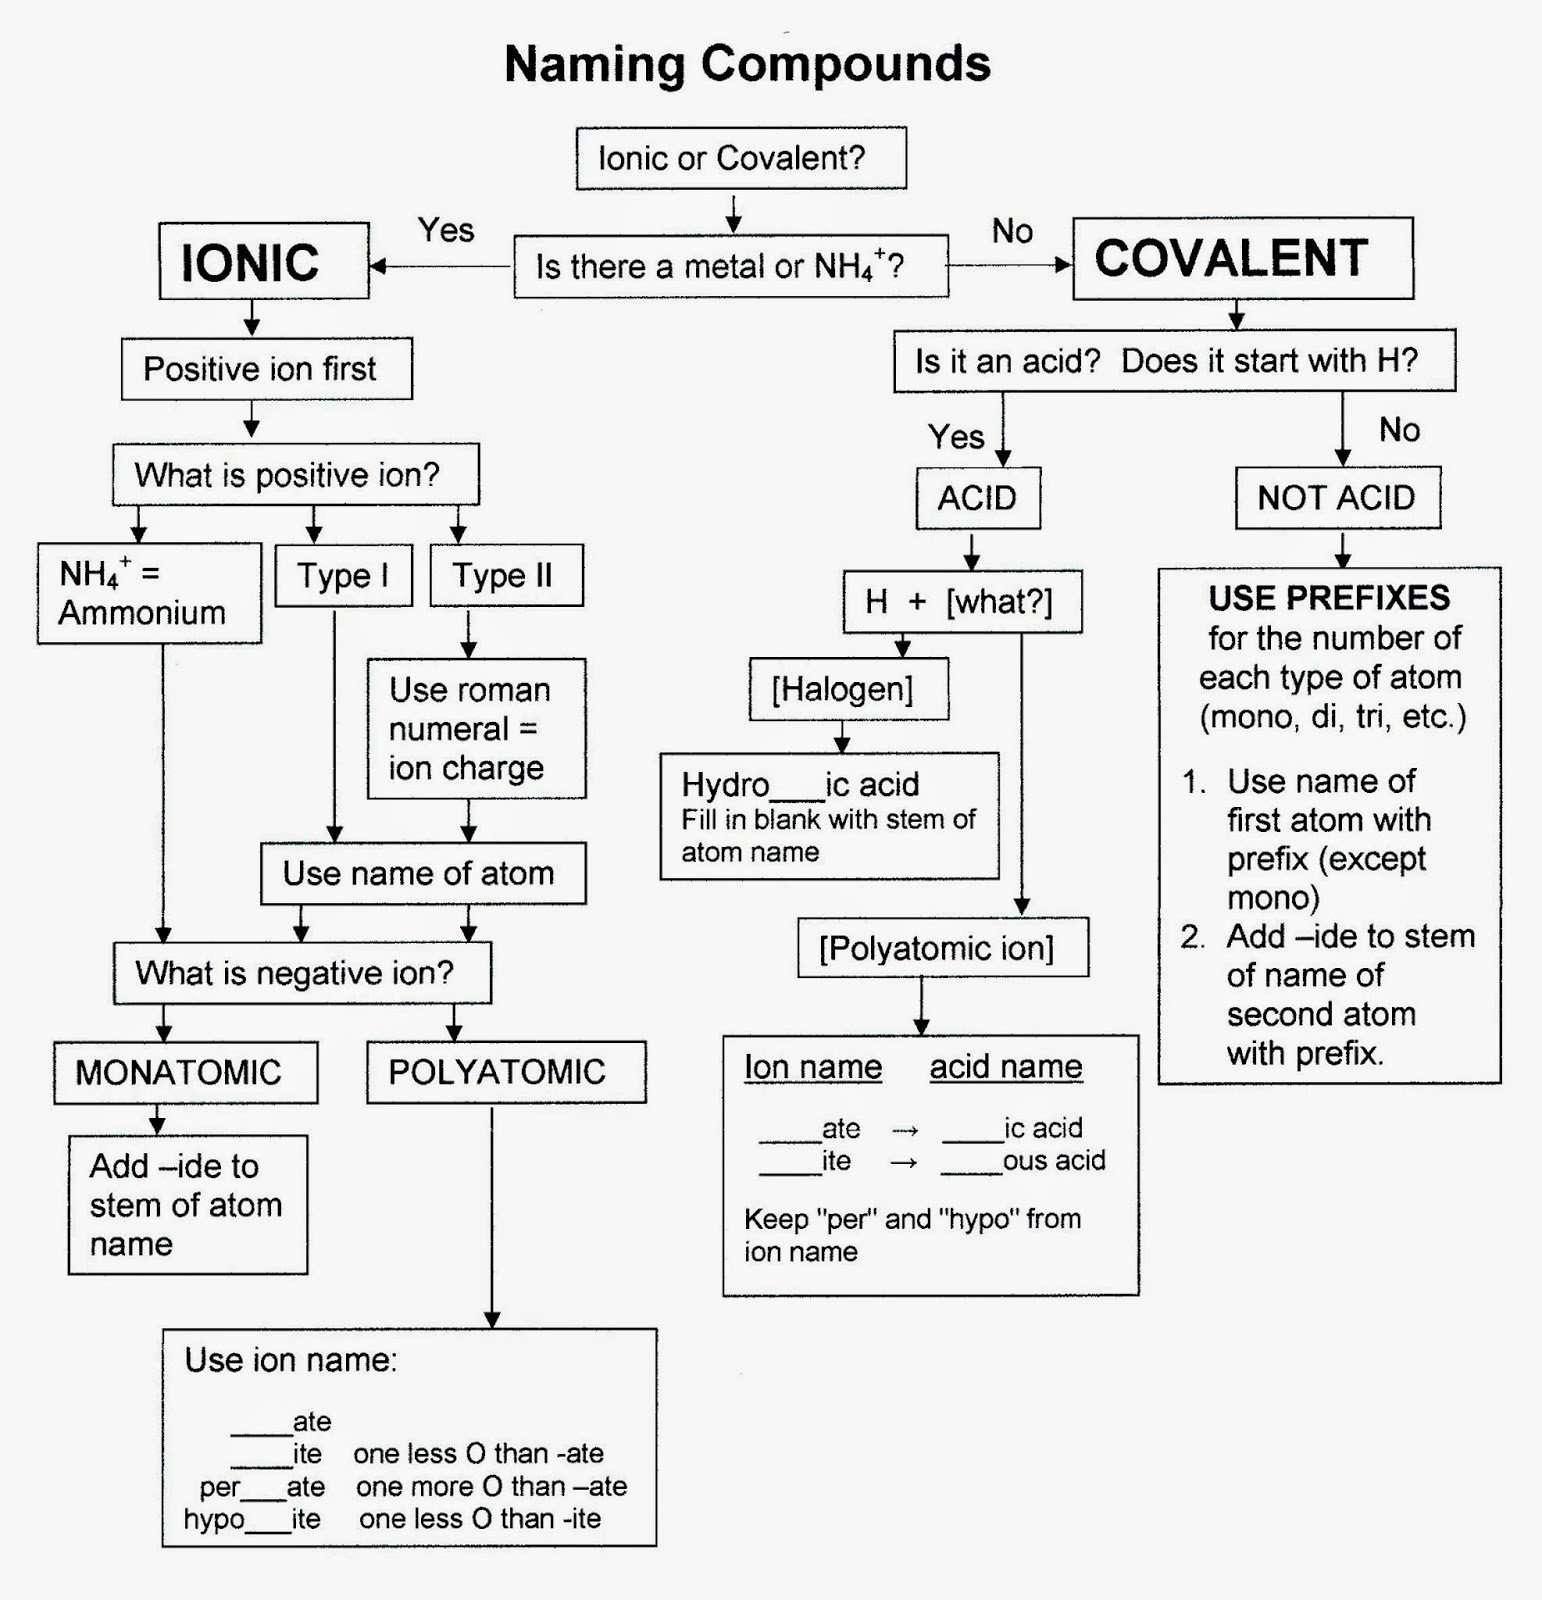 Chemistry and More: Naming Compounds Flowchart